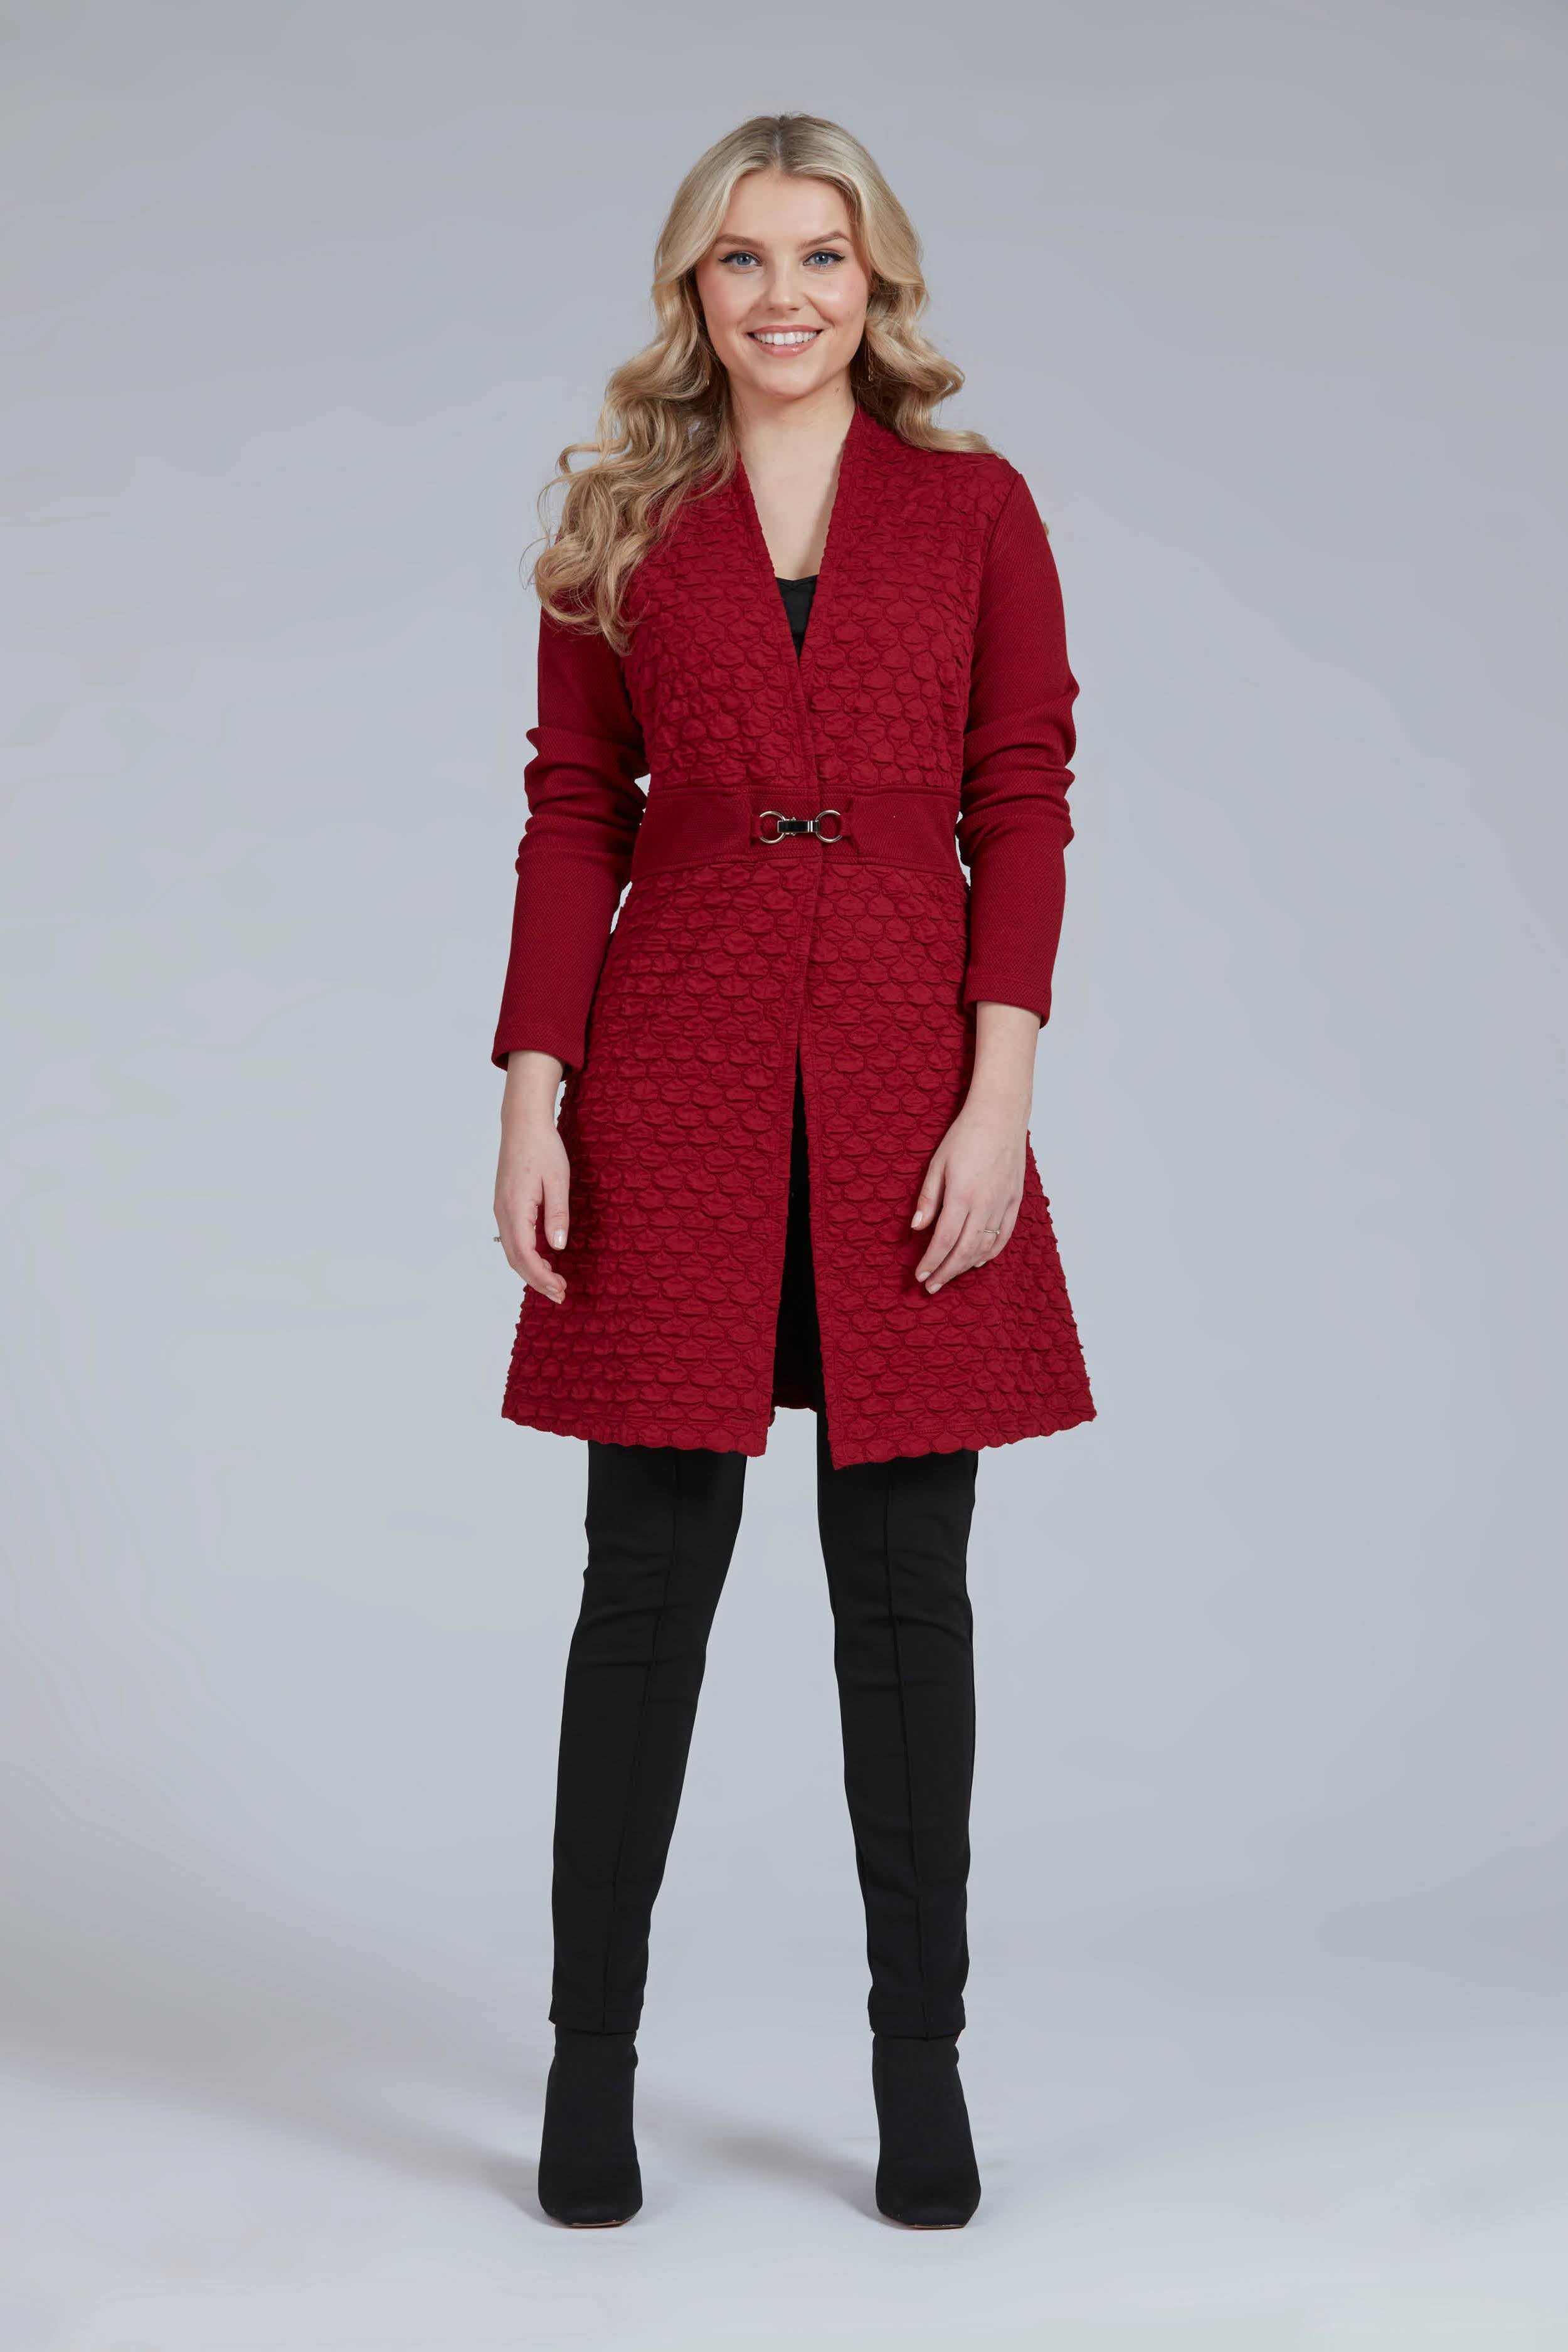 Starla Jacket by Luc Fontaine, Red, textured fabric, fit and flare shape, clasp closure at waist, sizes 4-16, made in Canada